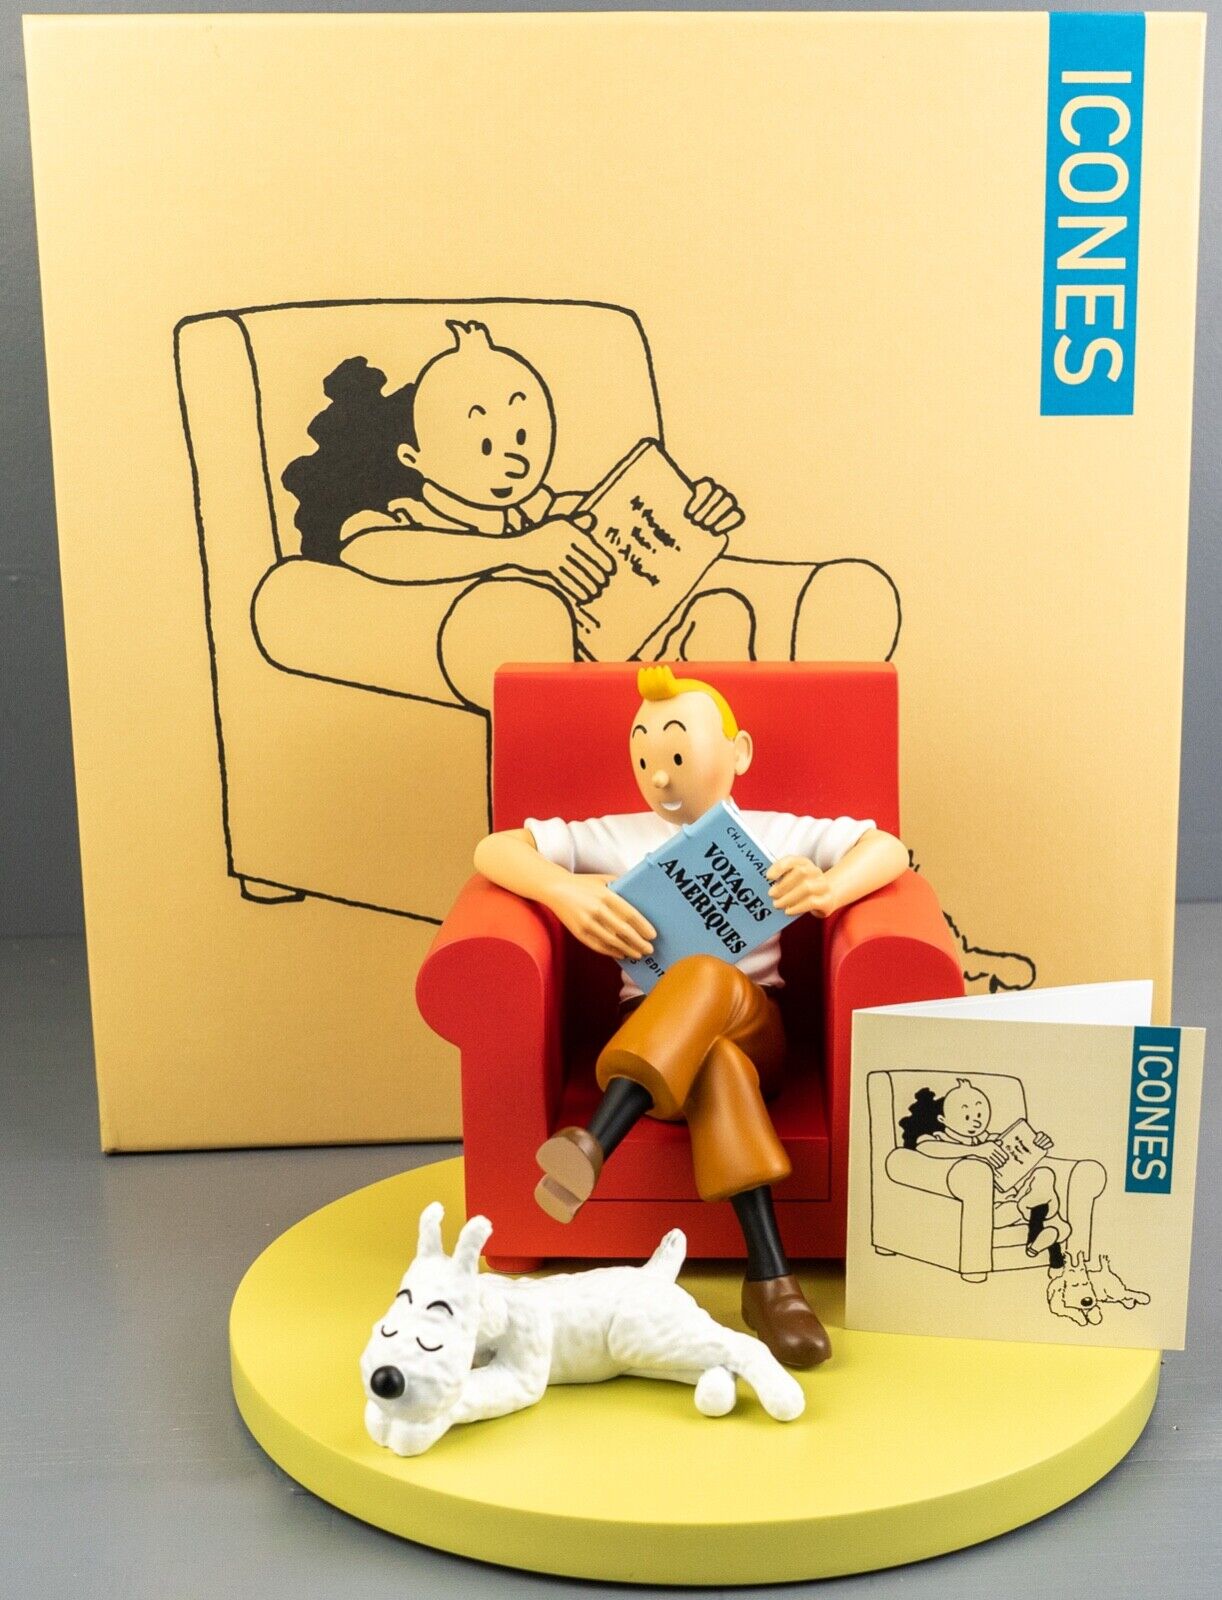 Statuette Moulinsart 46404 Tintin & Snowy @ home "Les Icones" 16cm Resin Model